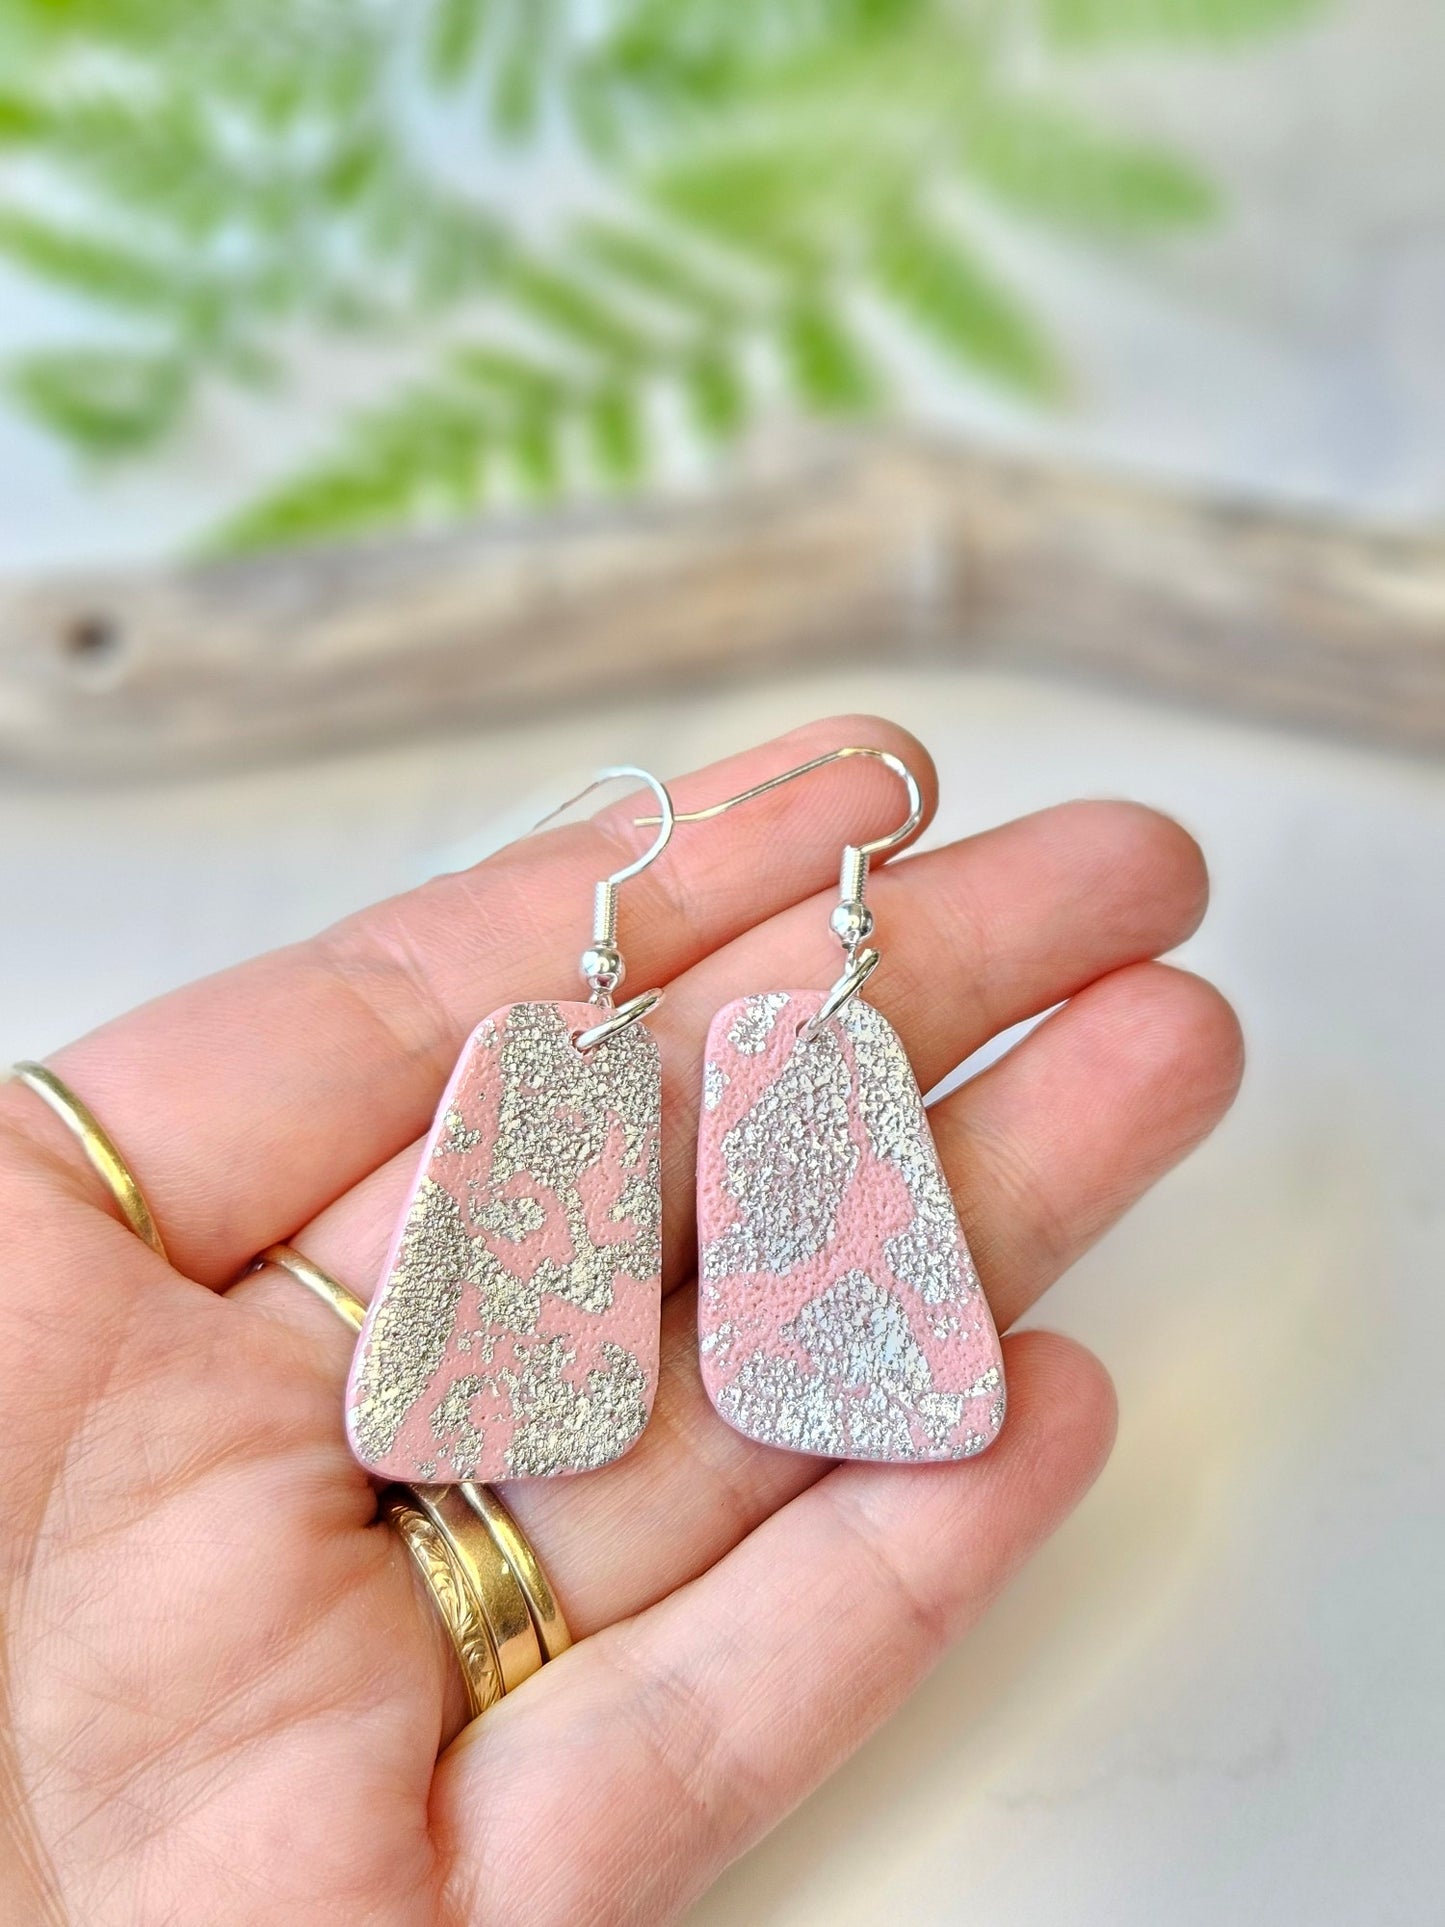 Earring dangles - pink sparkle drops